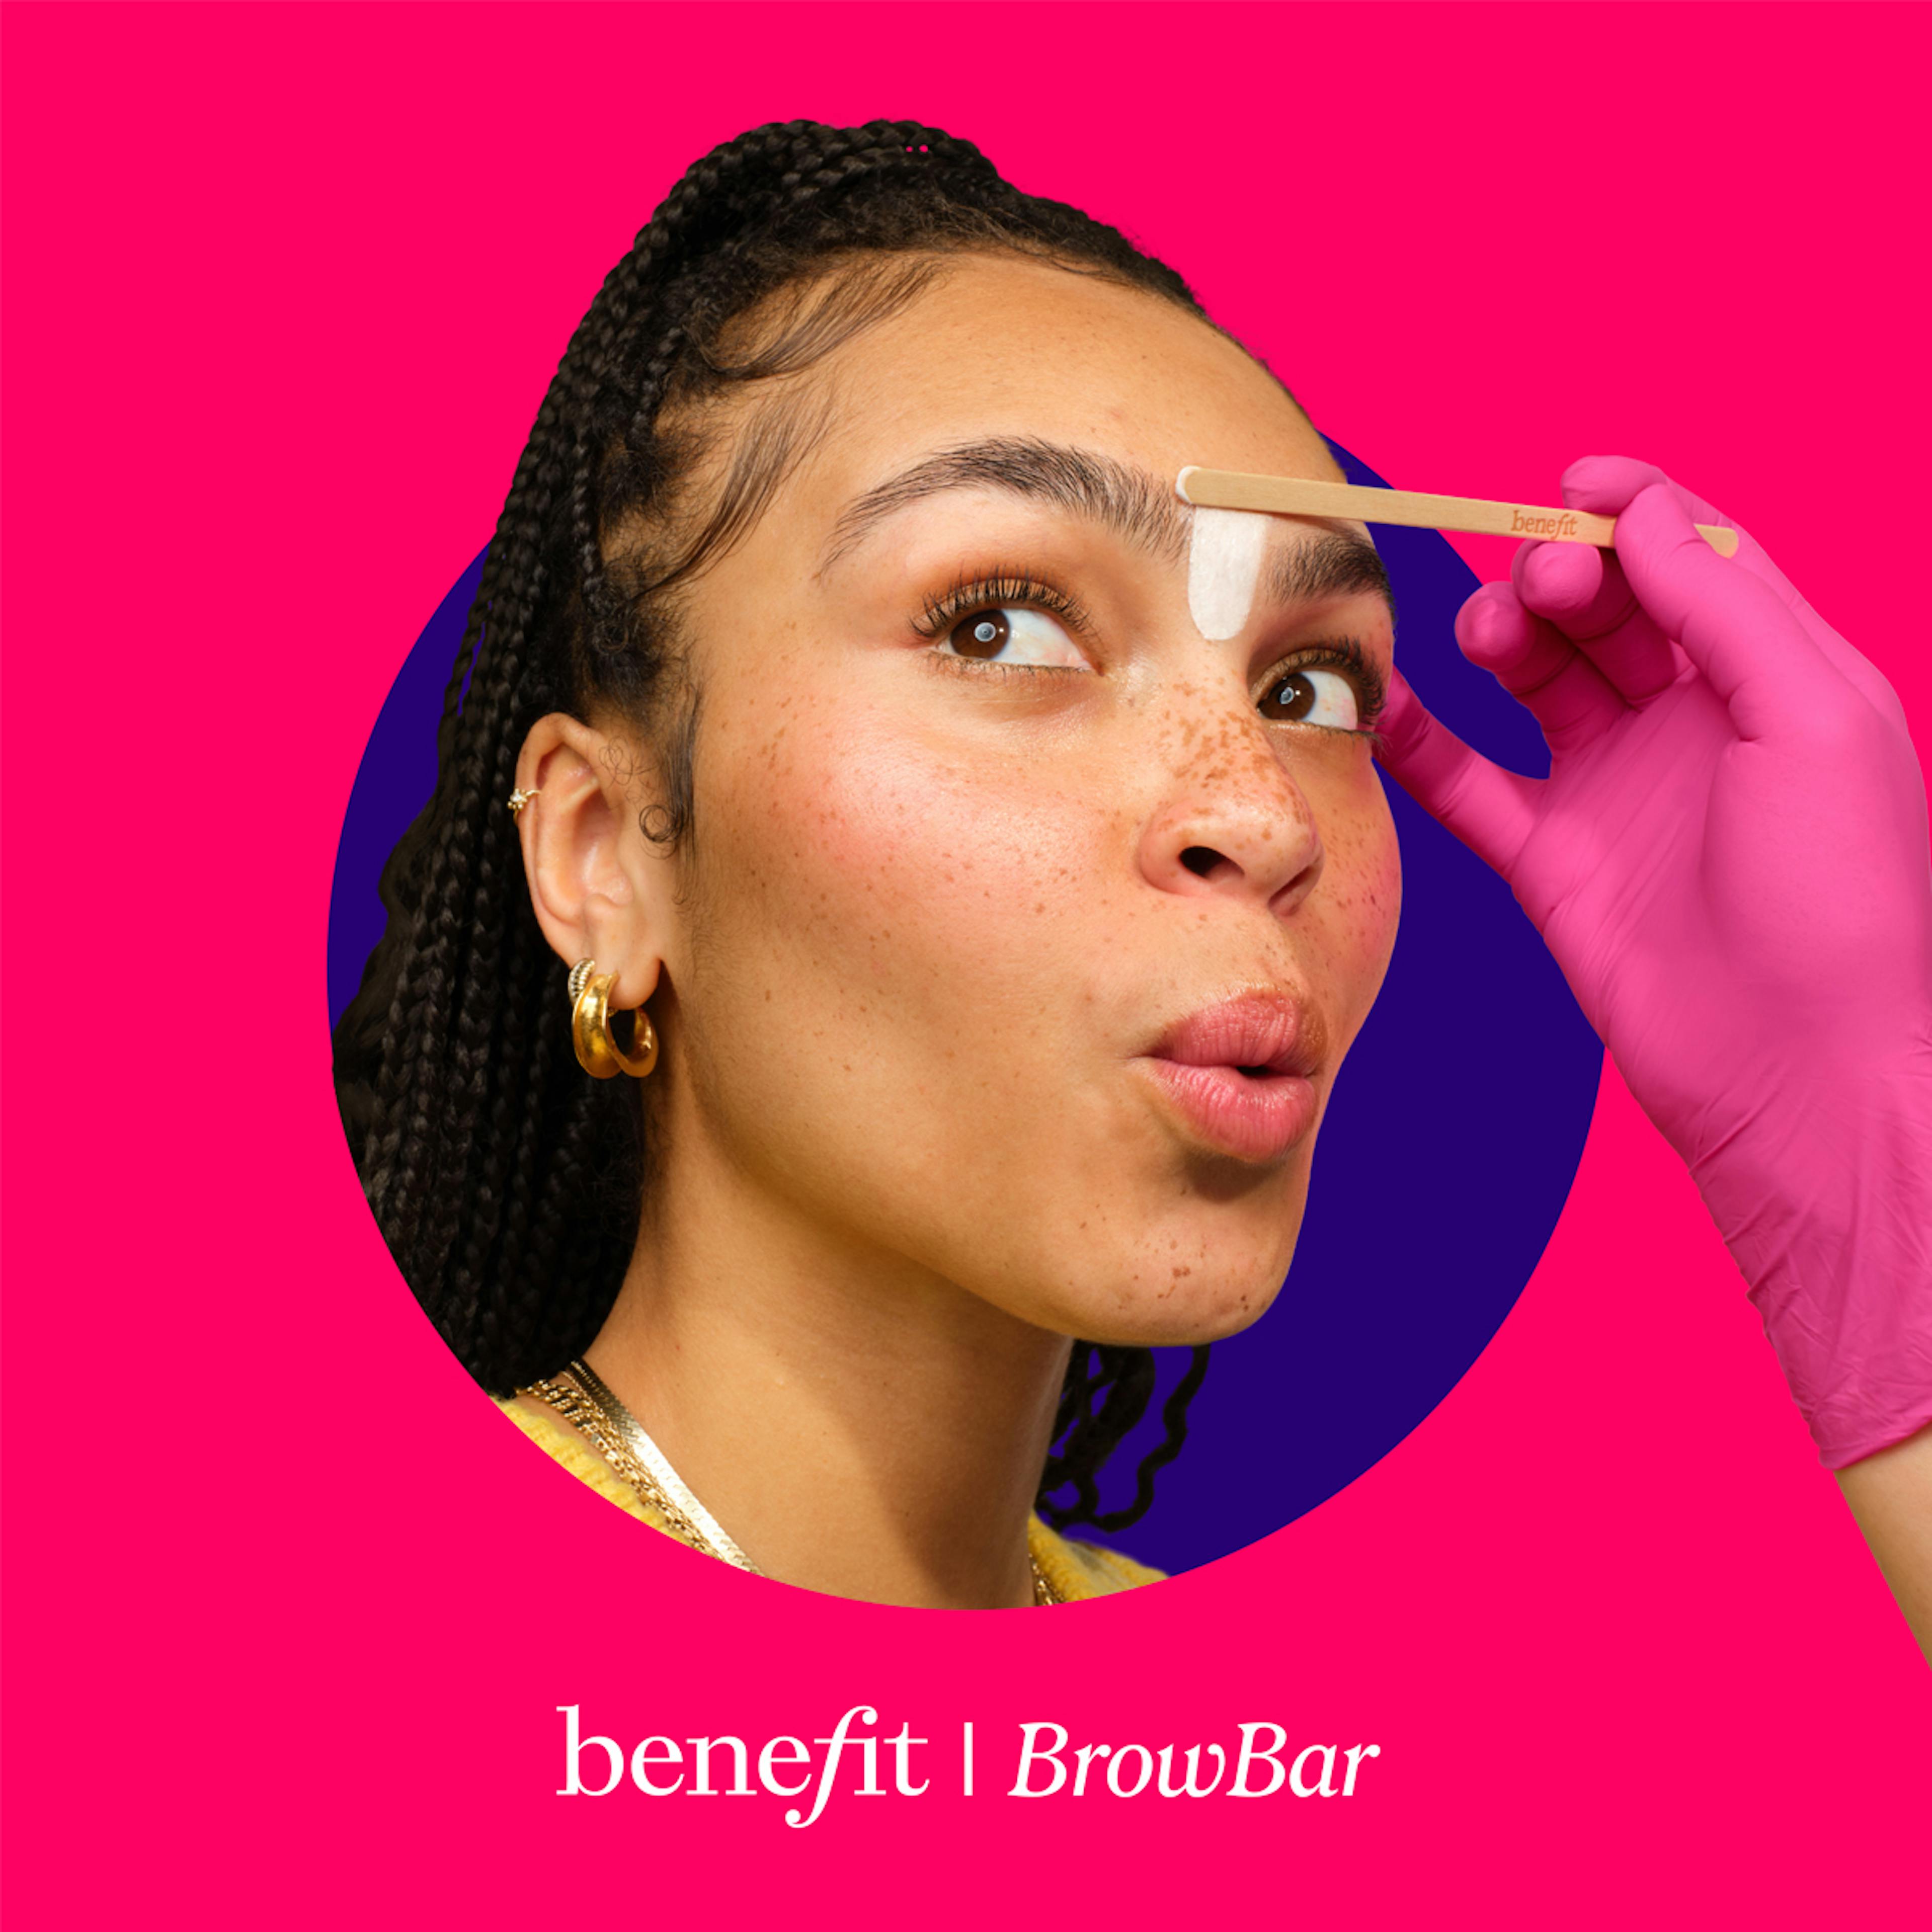 Benefit is the world's largest employer of aestheticians with 5,000+ Brow & Beauty Experts worldwide. 